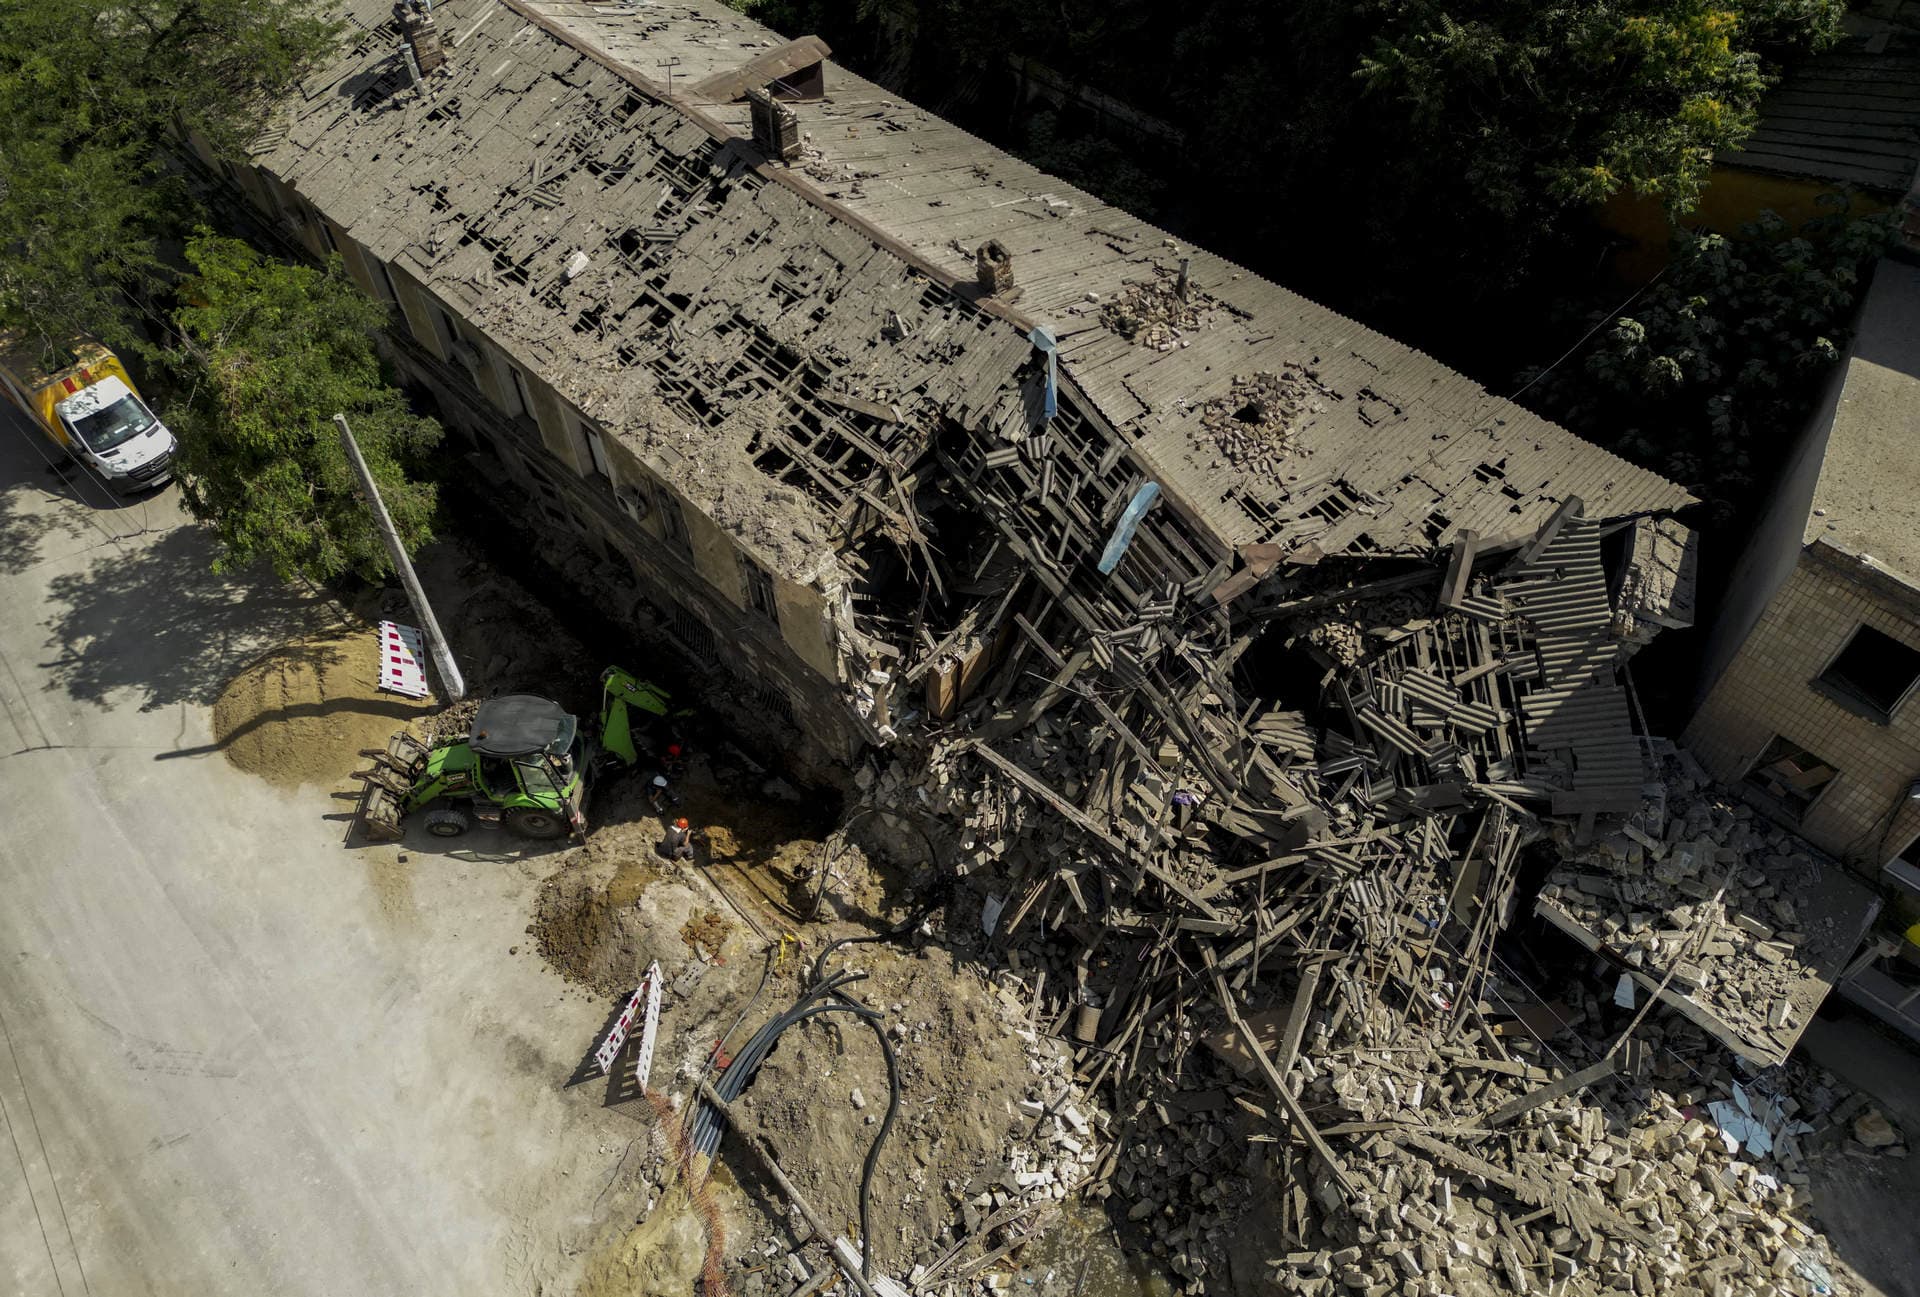 An aerial view of the damaged building after Russian missile attacks in Odessa